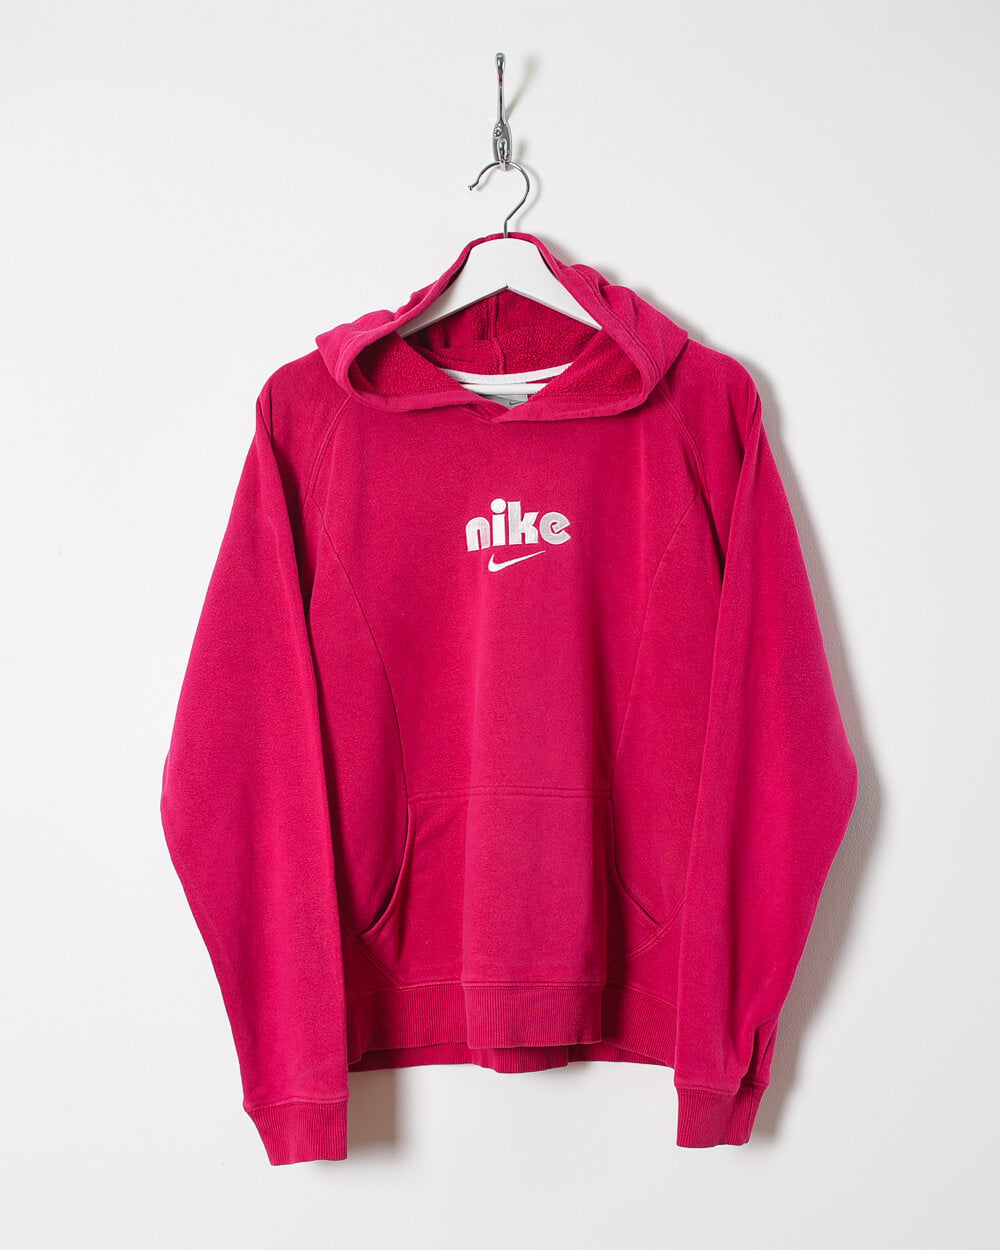 Nike Women's Hoodie - X-Large - Domno Vintage 90s, 80s, 00s Retro and Vintage Clothing 